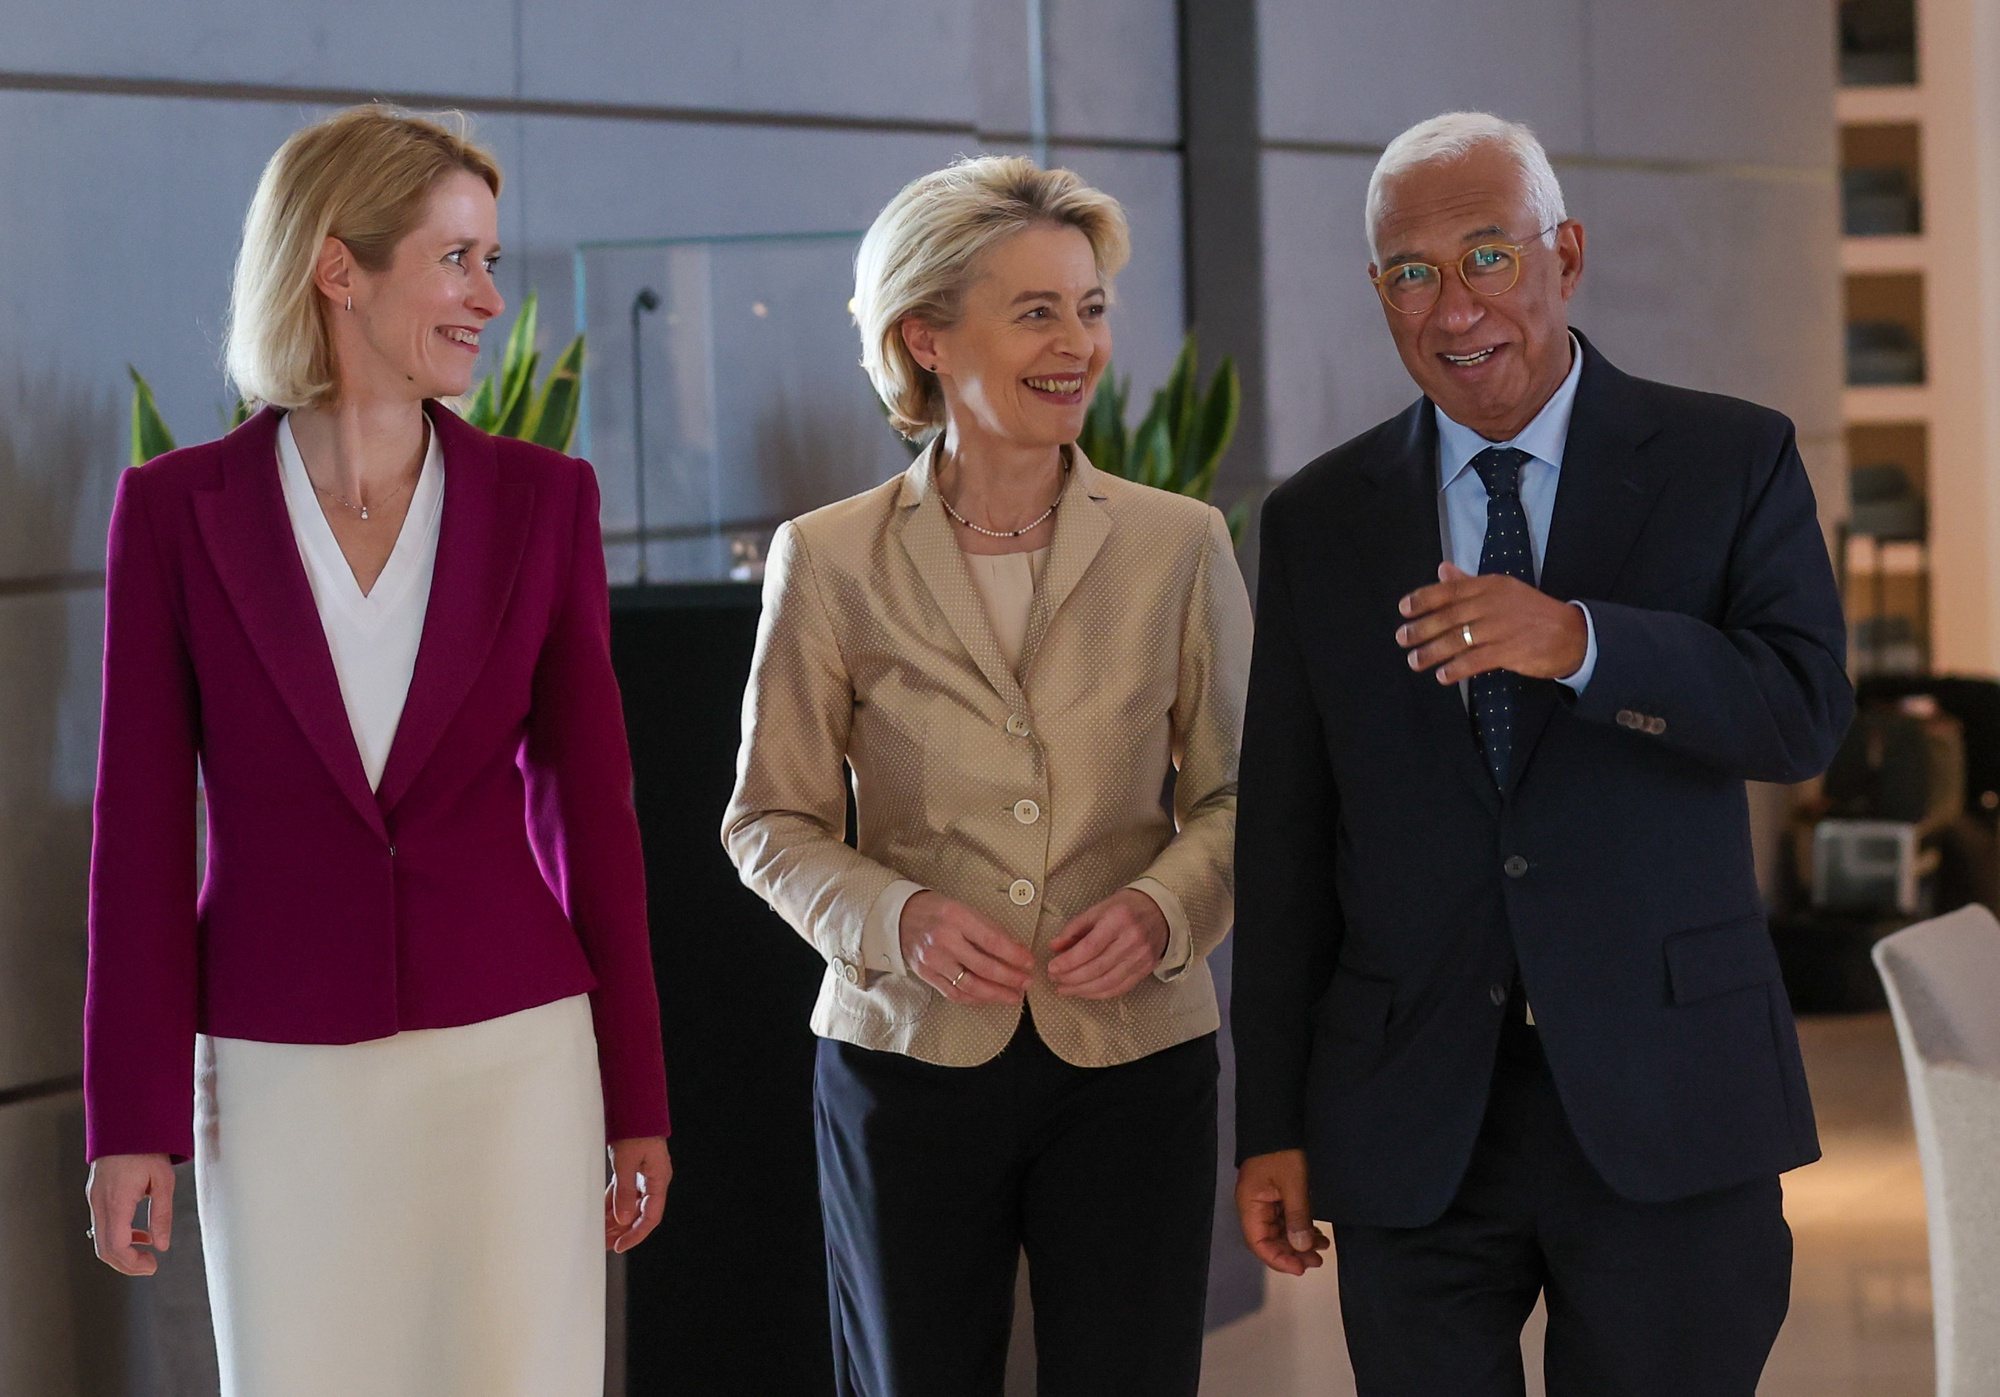 epa11443270 (L-R) Estonian Prime Minister Kaja Kallas, European Commission President Ursula Von der Leyen and former Portuguese Prime Minister Antonio Costa, during a meeting at Brussels Airport, a day after the EU summit in Brussels, Belgium, 28 June 2024. EU leaders agreed on proposing Ursula Von der Leyen as candidate for President of the European Commission and Kaja Kallas as High Representative of the Union for Foreign Affairs and Security Policy, while Antonio Costa was elected as European Council President during a summit to discuss the Strategic Agenda 2024-2029, the next institutional cycle, Ukraine, the Middle East, competitiveness, security and defense, among other topics.  EPA/OLIVIER HOSLET / POOL